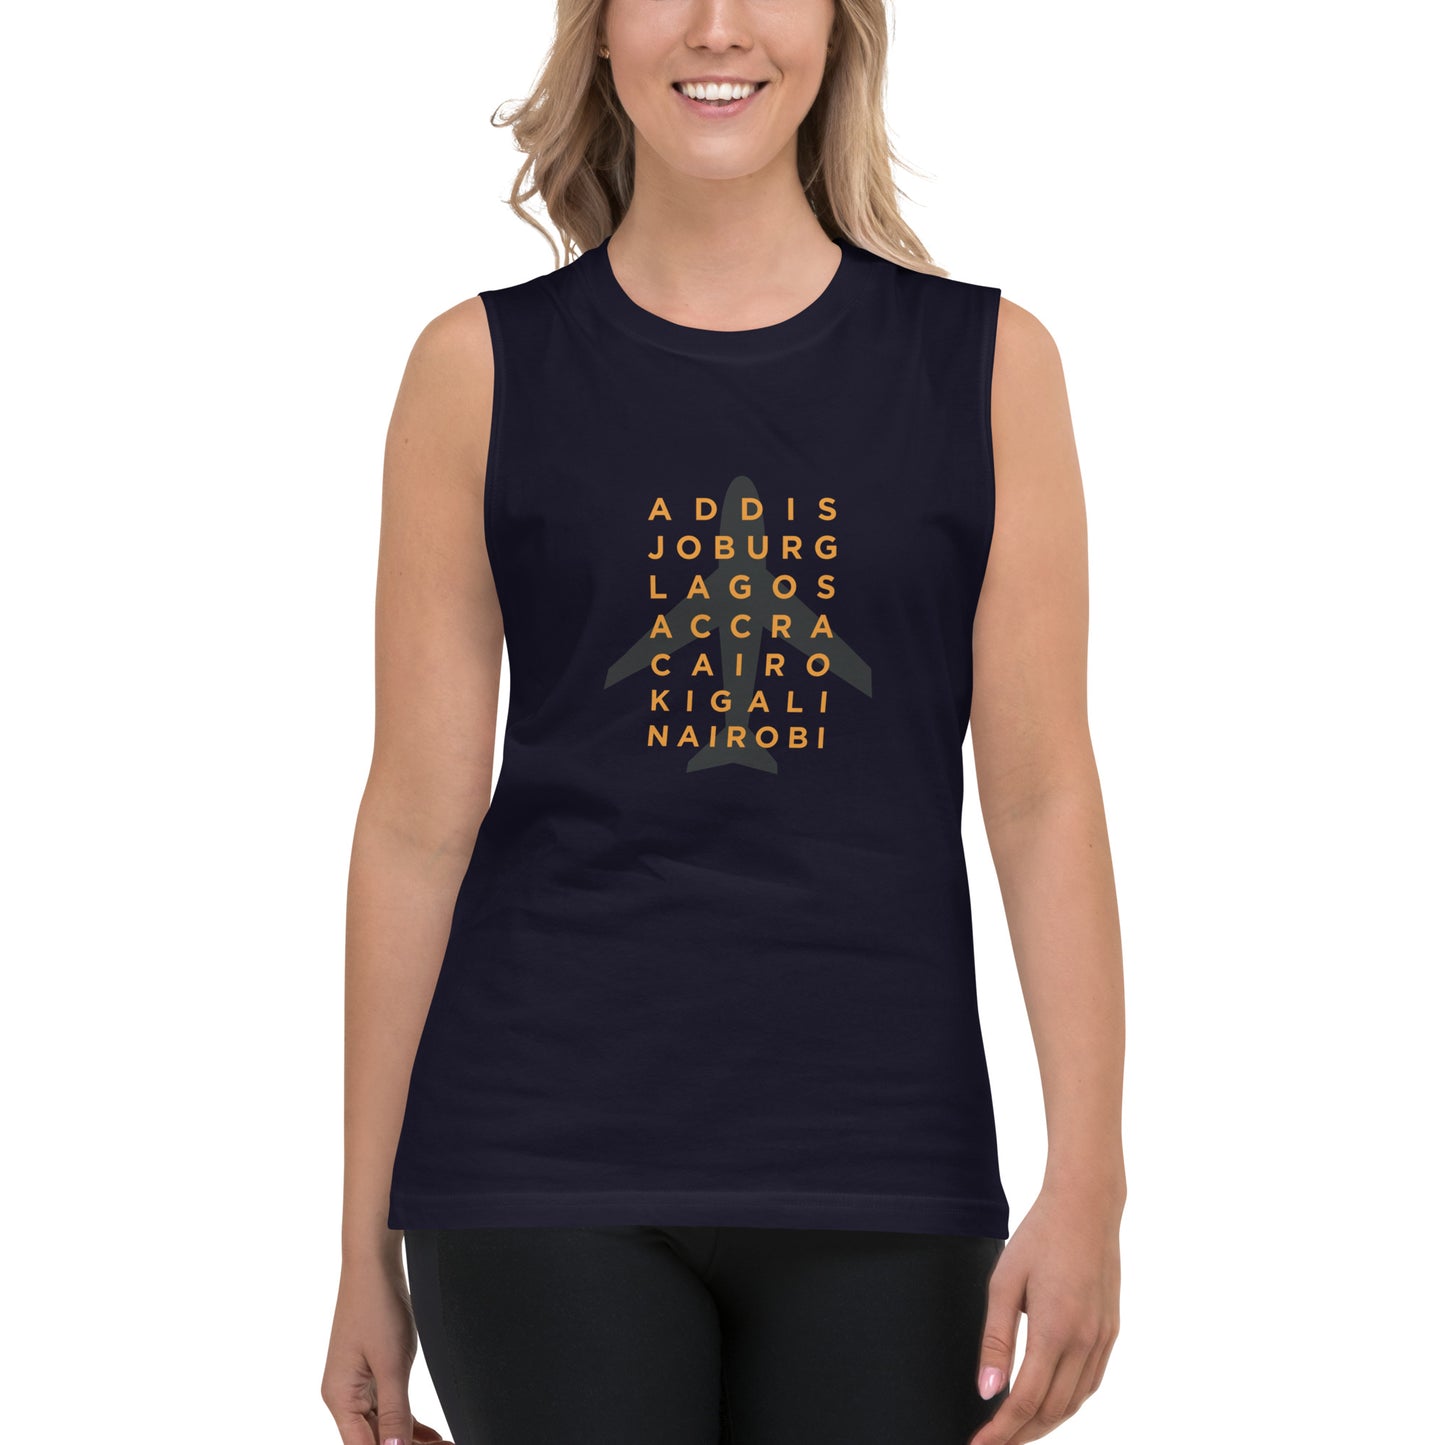 AFRICAN CITIES Muscle Shirt